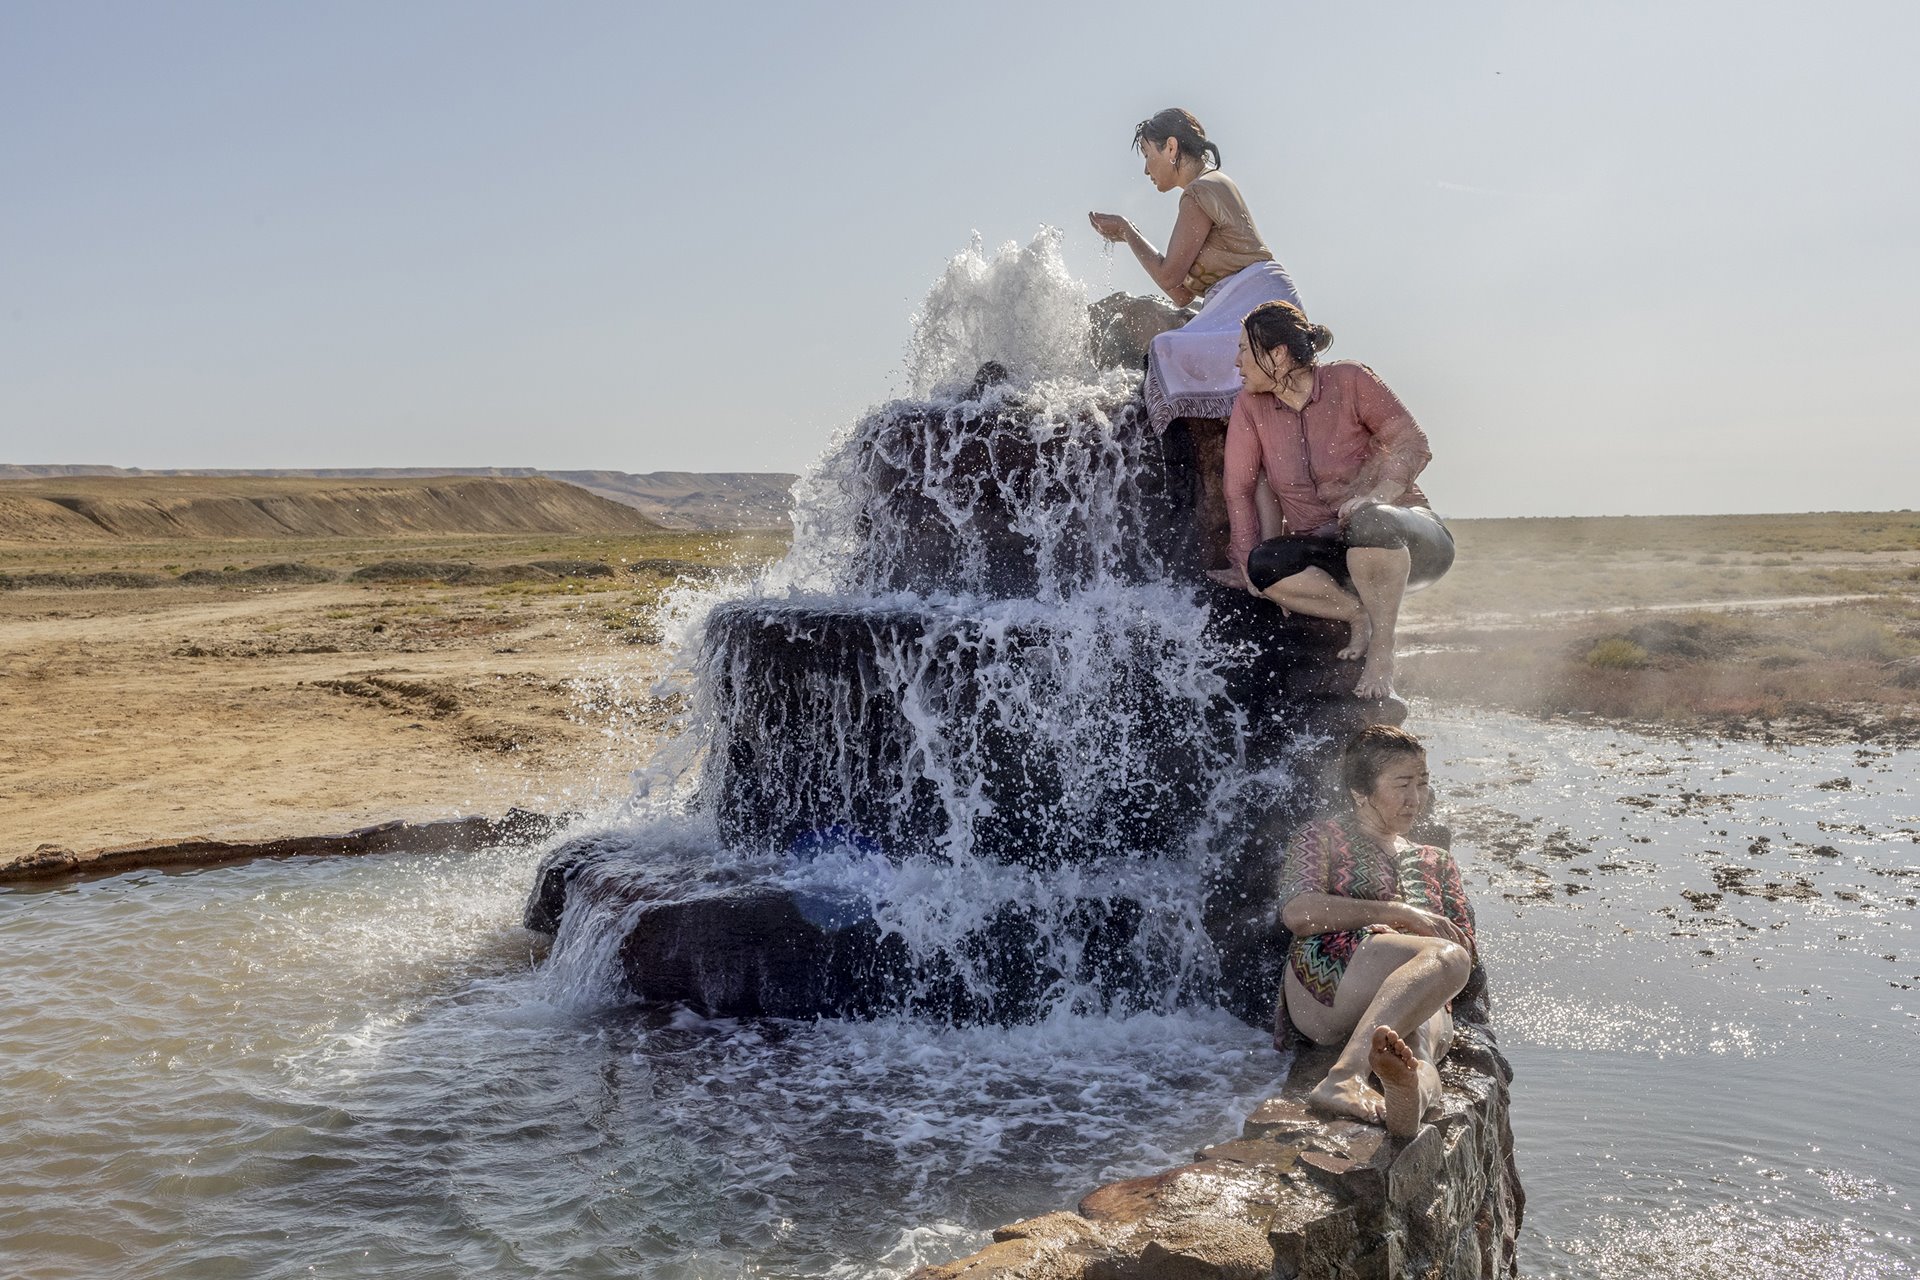 <p>Women visit a hot spring that has emerged from the dried bed of the Aral Sea, near Akespe village, Kazakhstan. Once the world&rsquo;s fourth-largest lake, the Aral Sea has lost 90 percent of its content since river water was first diverted to serve agriculture and industry in the 1960s.</p>
